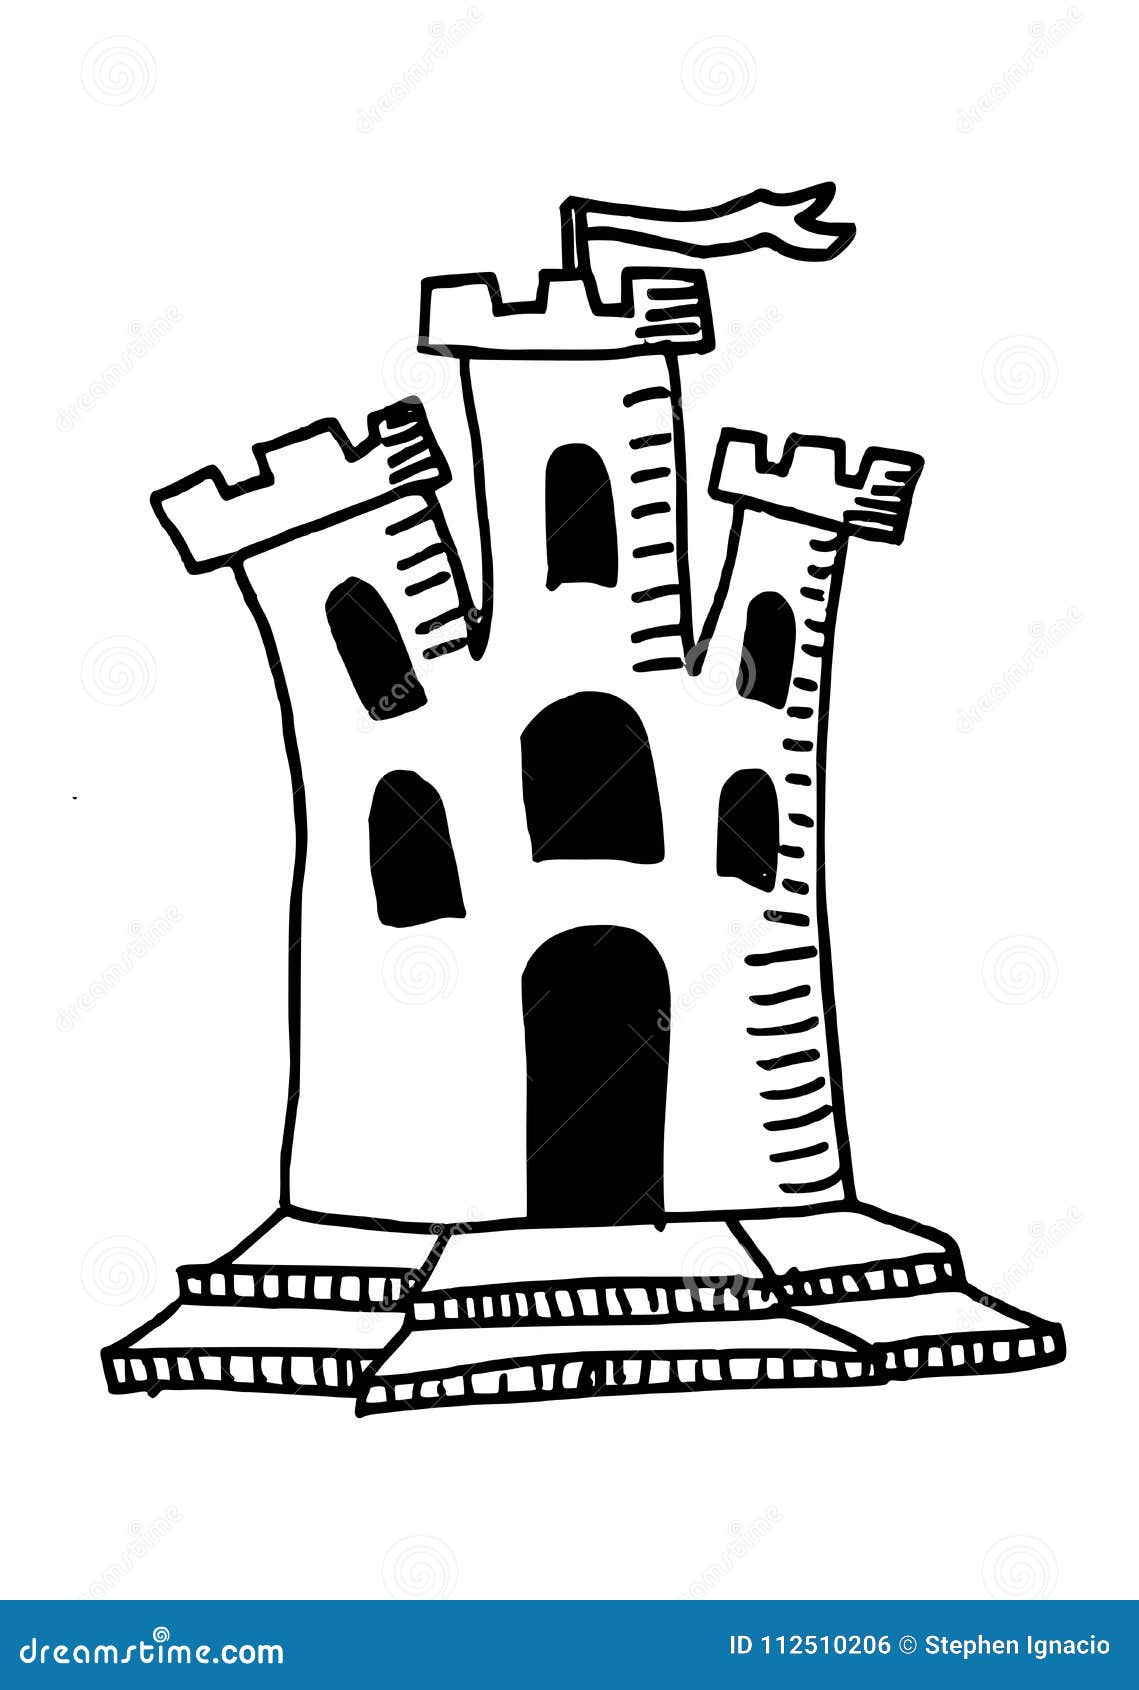 Doodle Art Styled Cartoon Of A Castle Hand Drawn Illustration